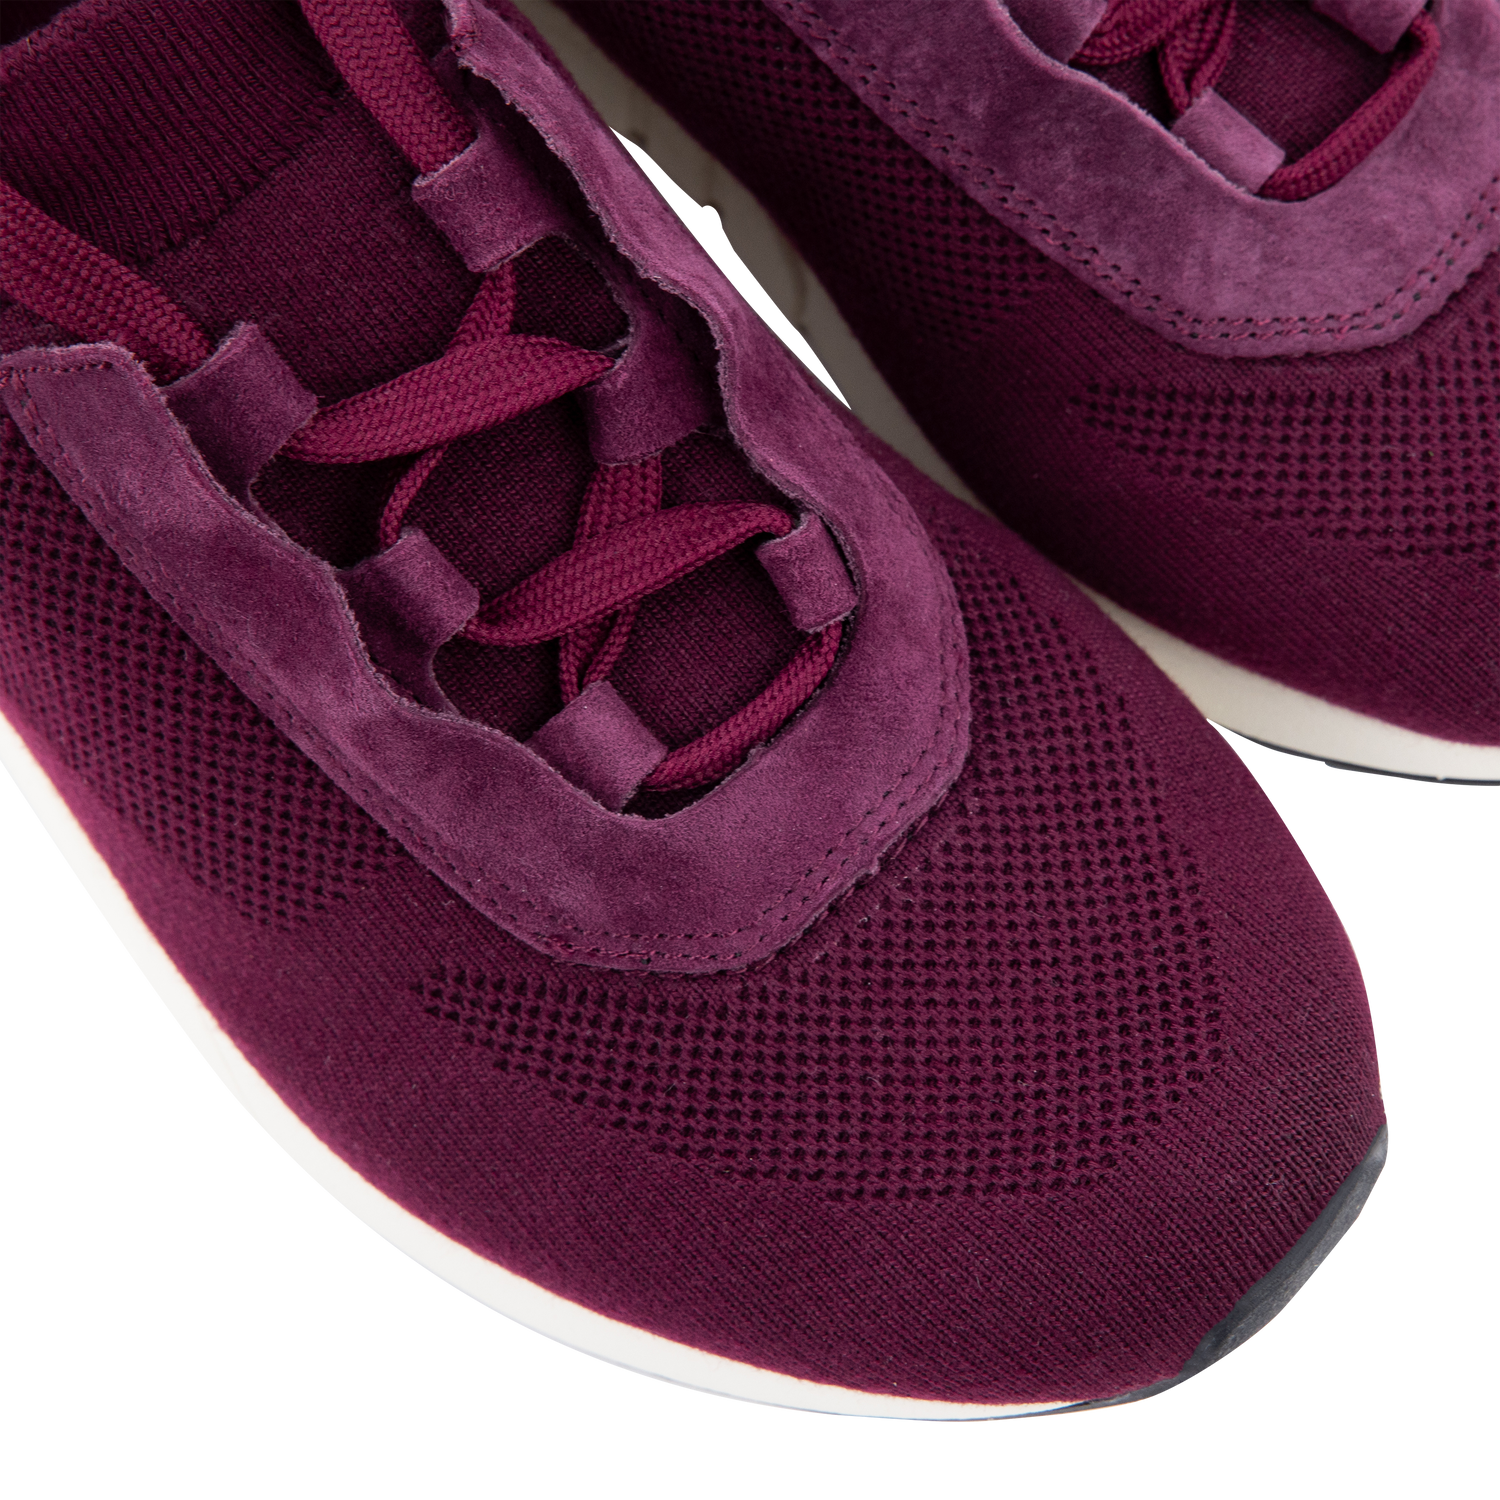 Maroon Athletic Tennis Shoes